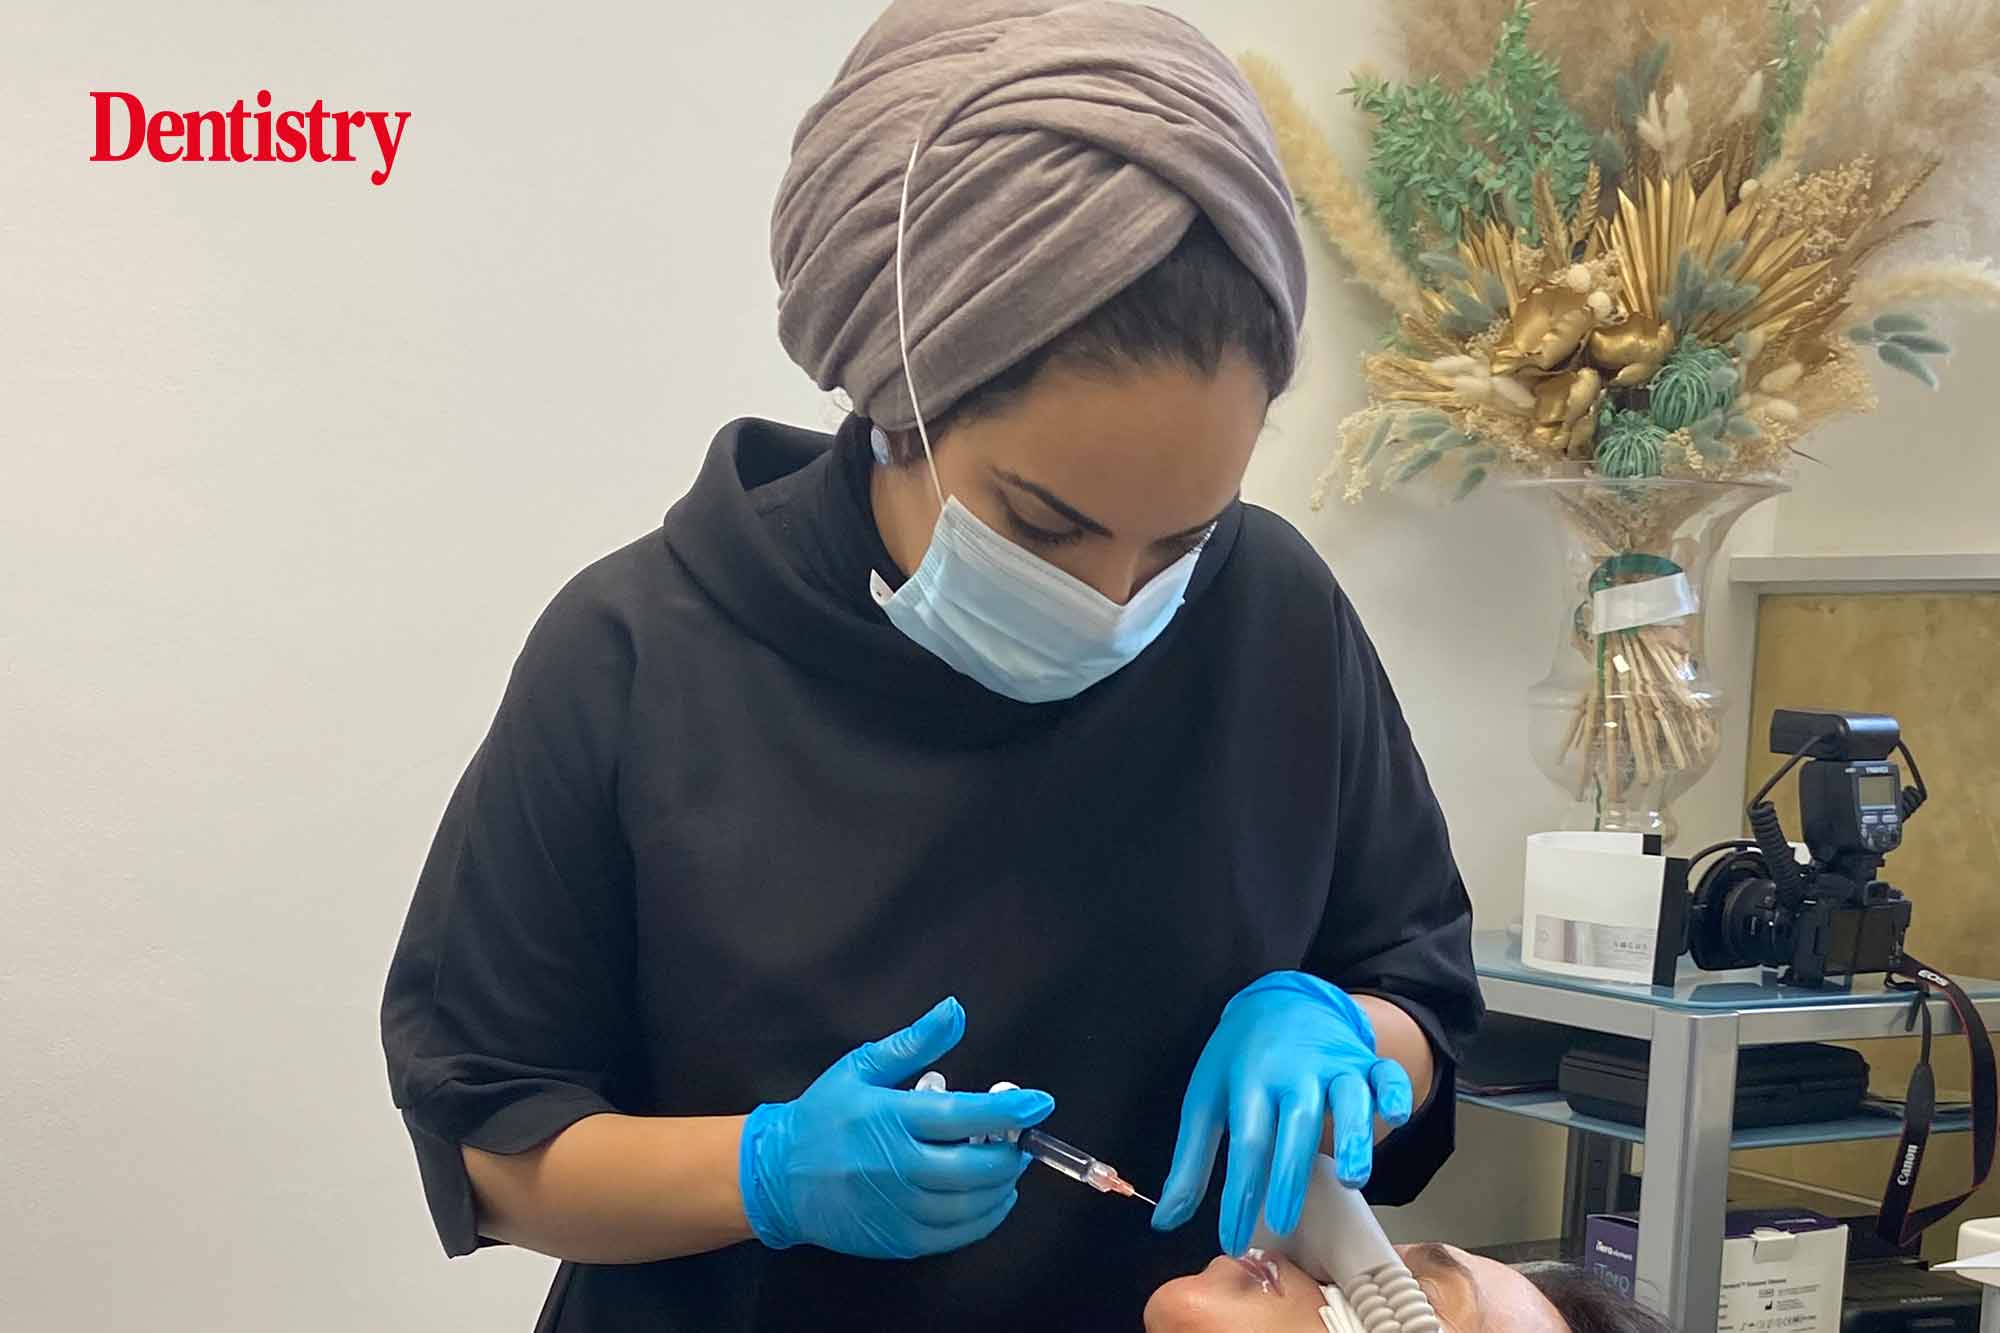 Dr Safa Al-Naher discusses the emerging popularity of dental spas and why she believes a holistic approach to dental care is essential for patient experience.